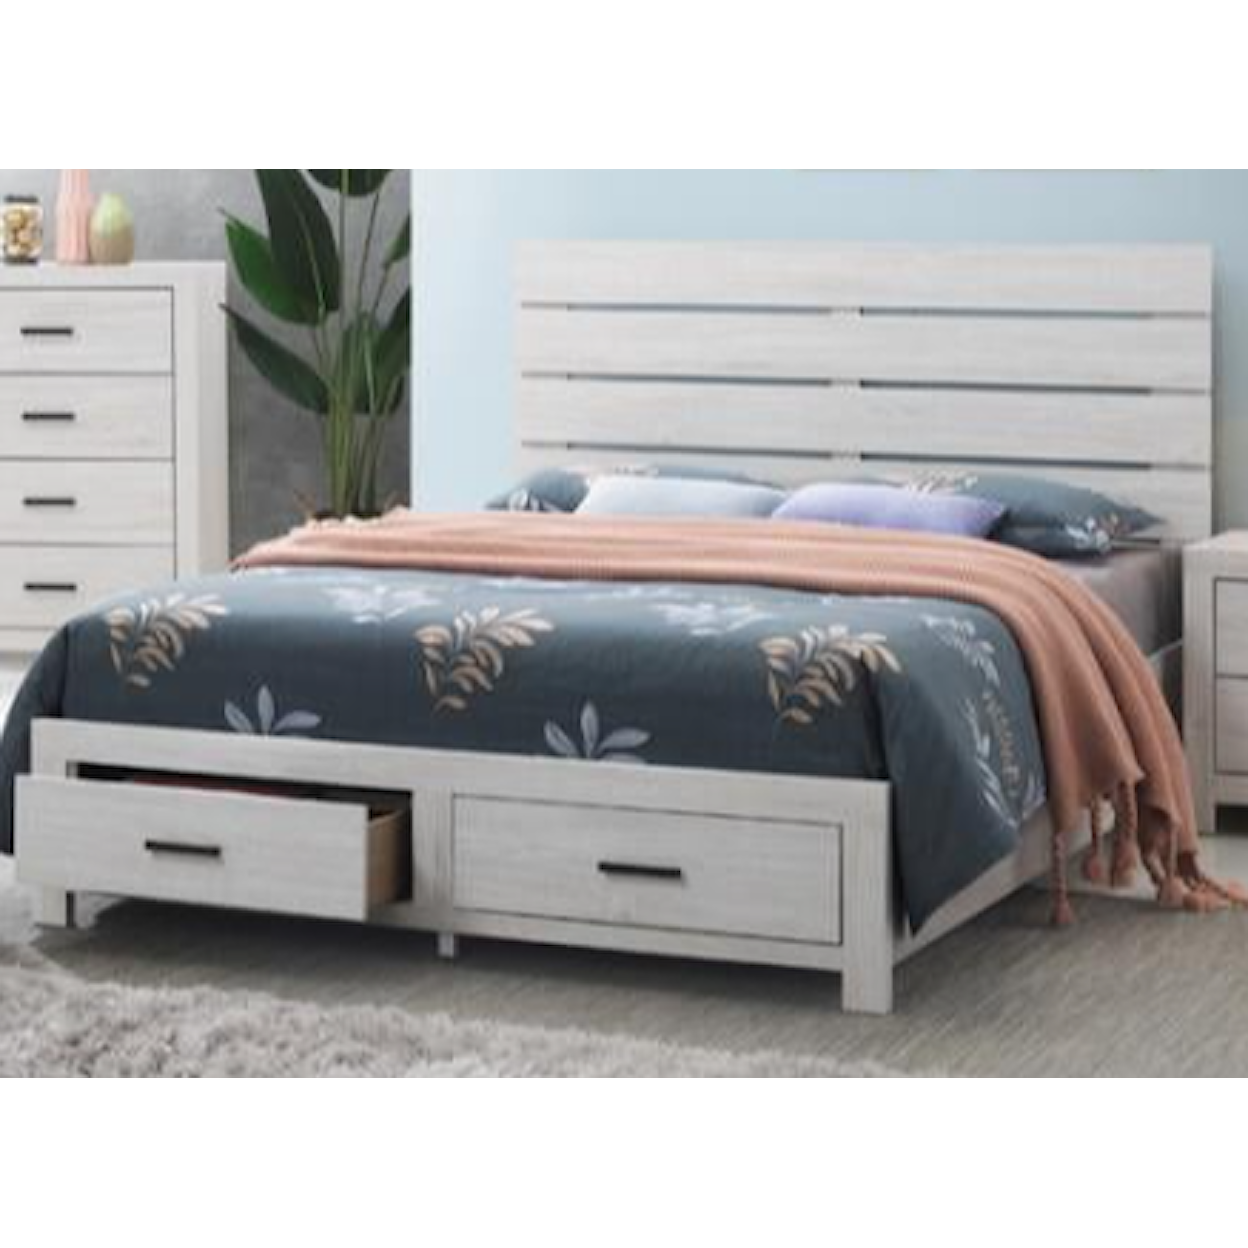 Coaster River RIVER WHITE QUEEN STORAGE BED |